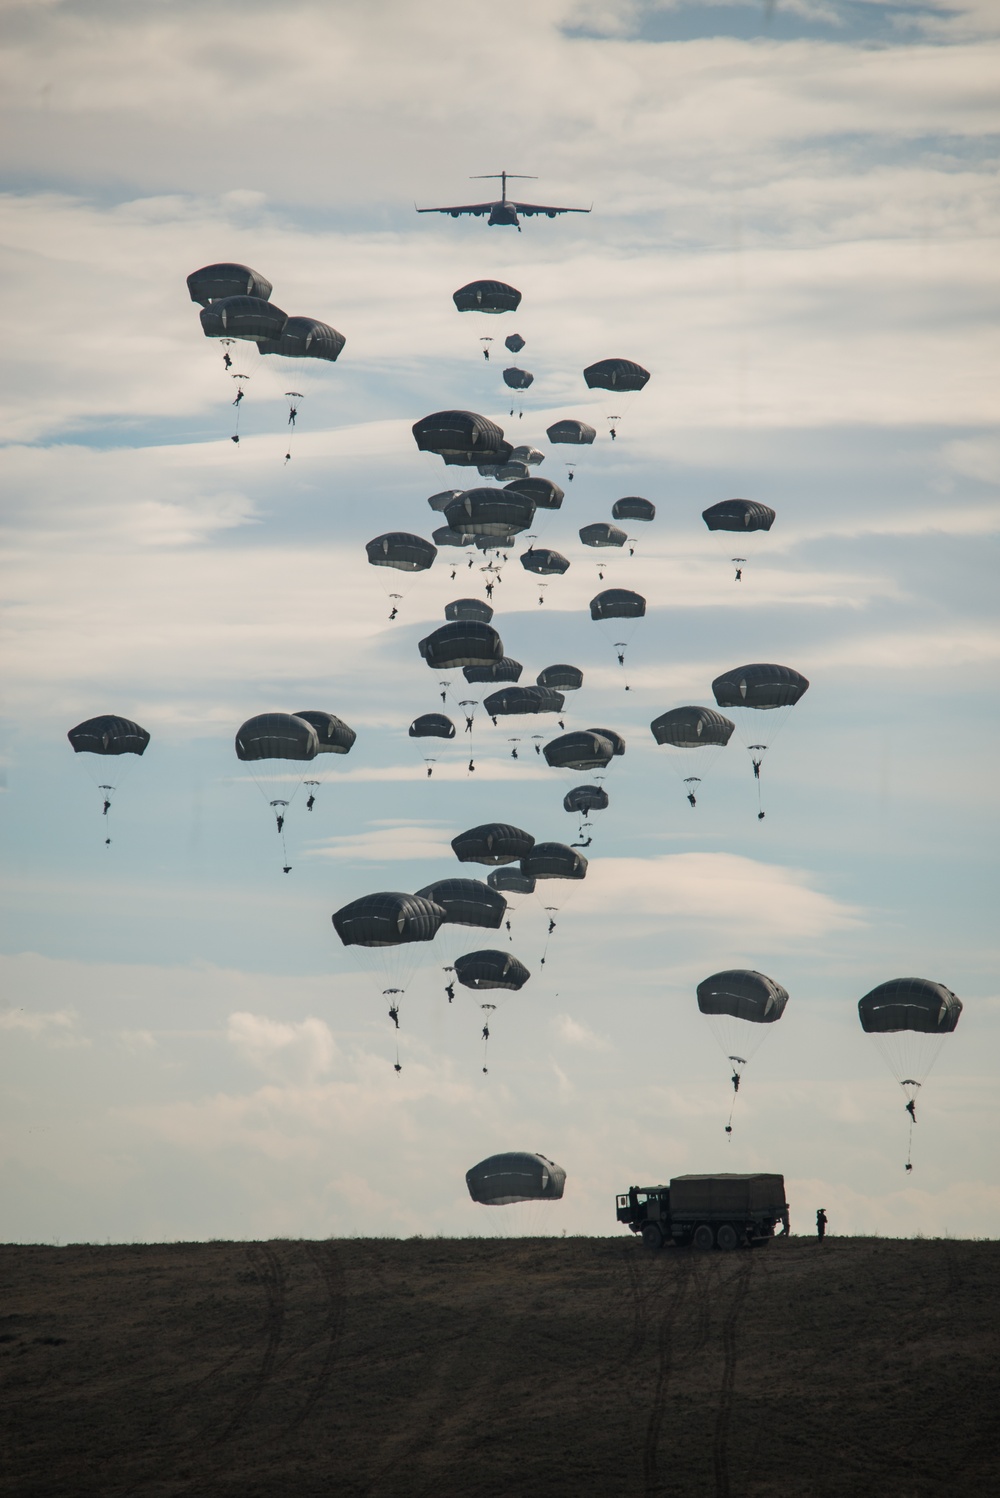 Trident Juncture 2015 Joint Land Force Heavy Military Demonstration